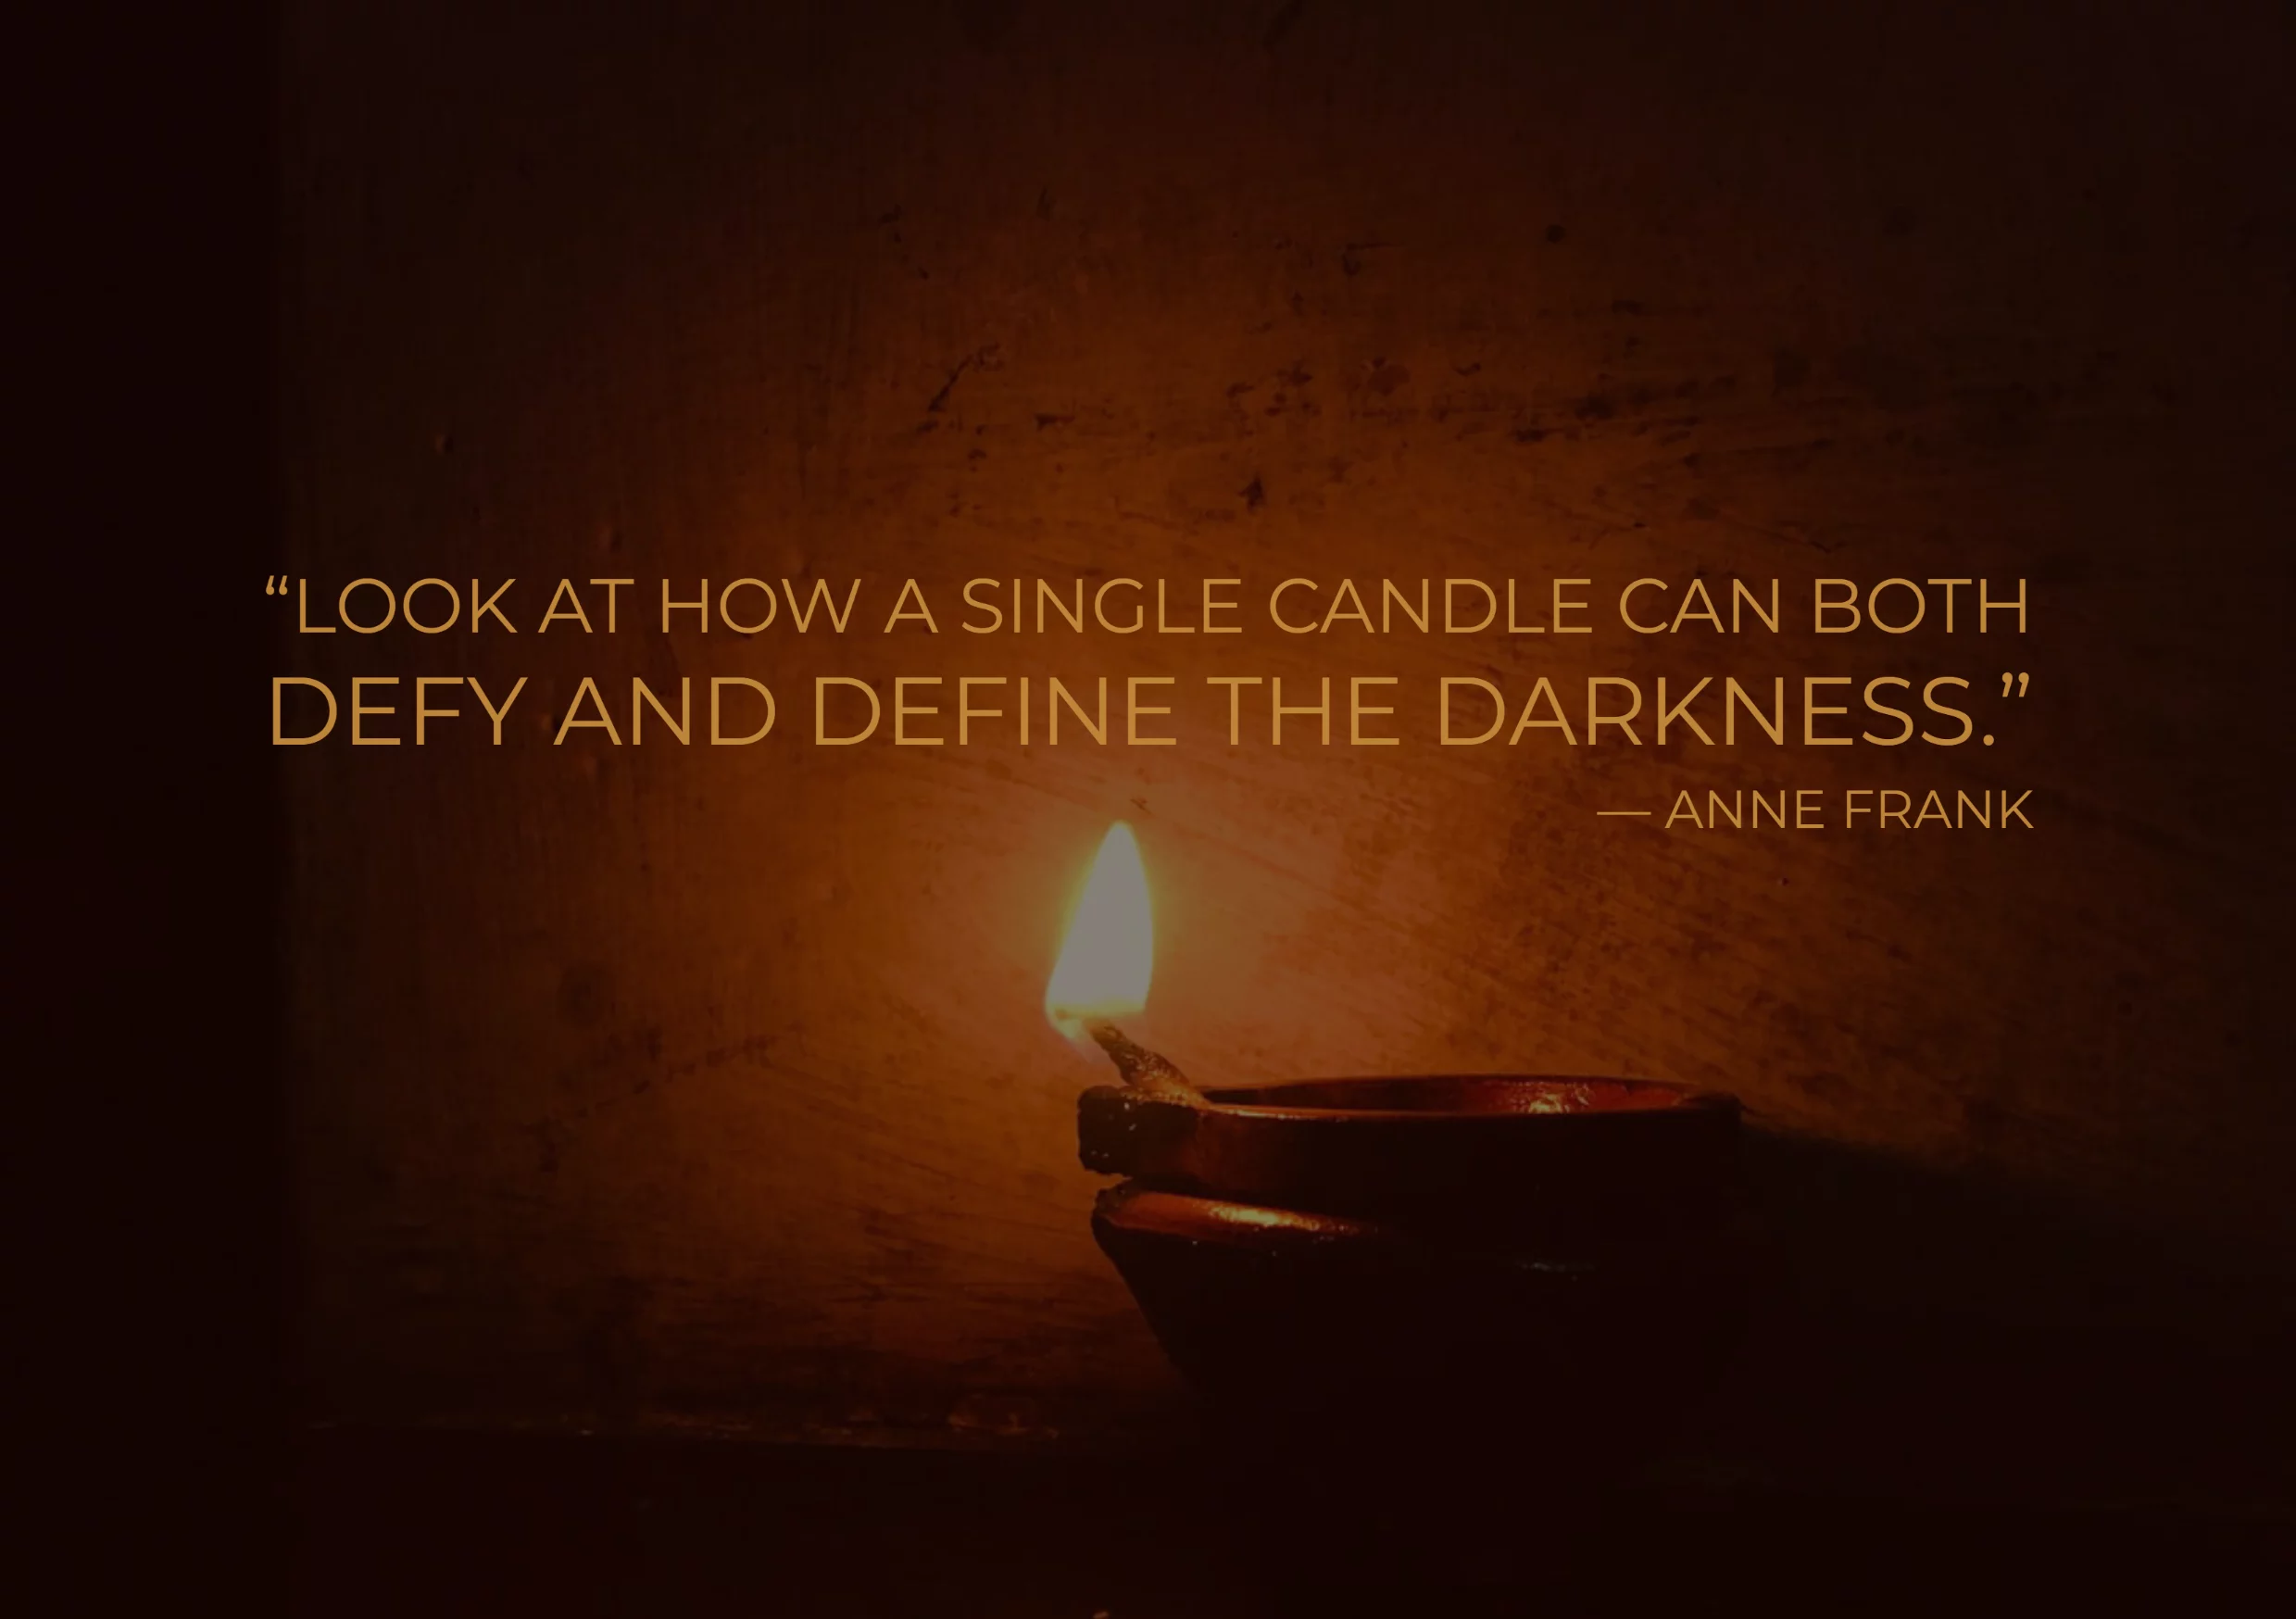 Anne Frank One Candle Defies and Defines the Darkness